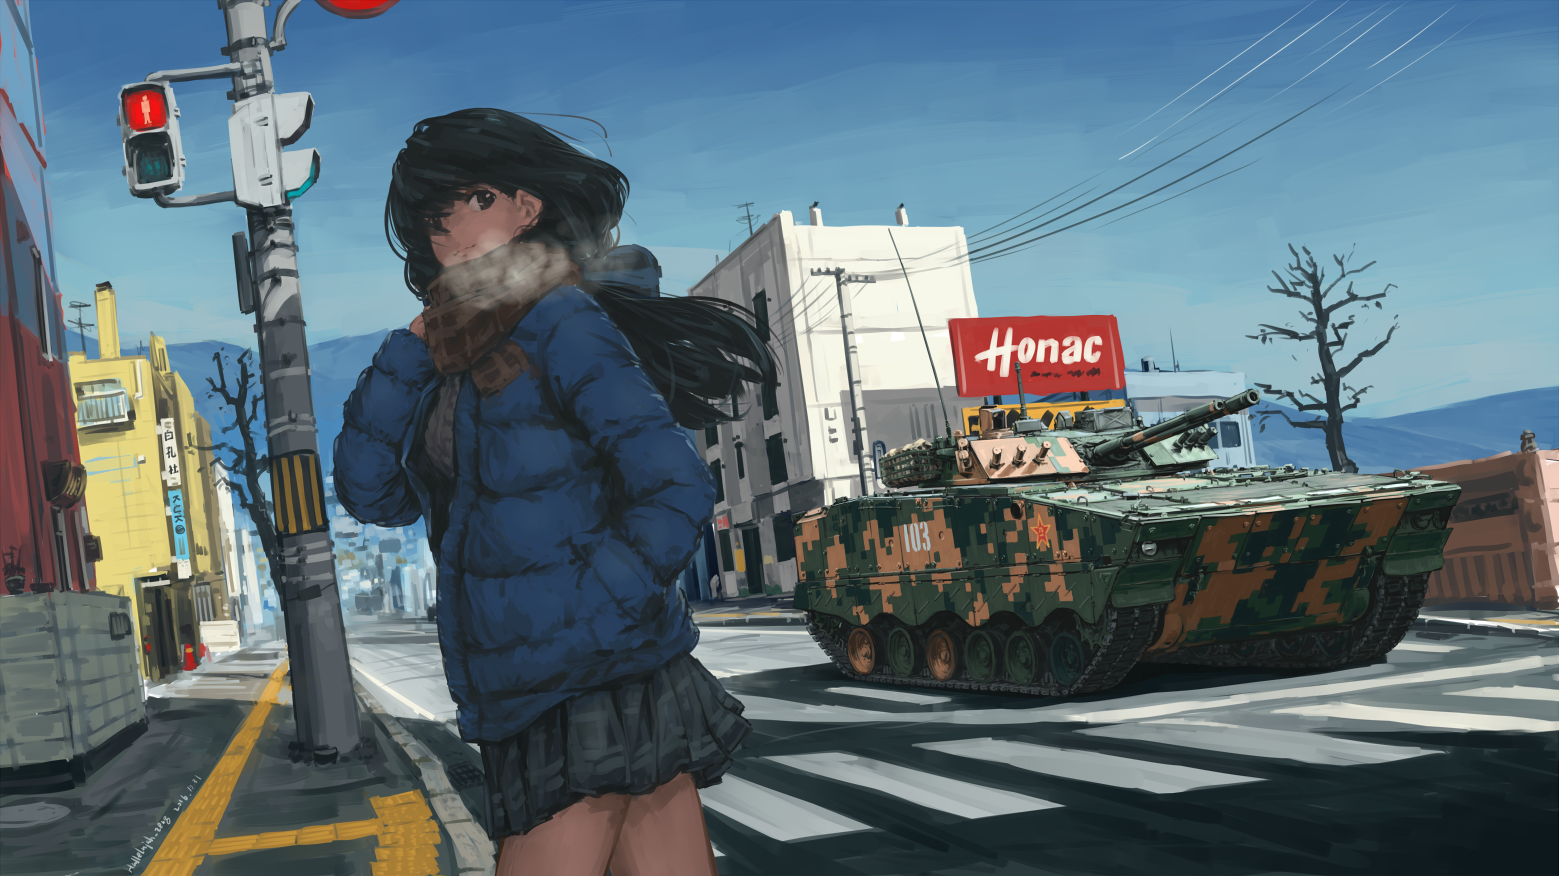 ZBD-97 (Type 97 Chinese IFV) - Anime art, Bmp, , Apc, Anime, Armored vehicles